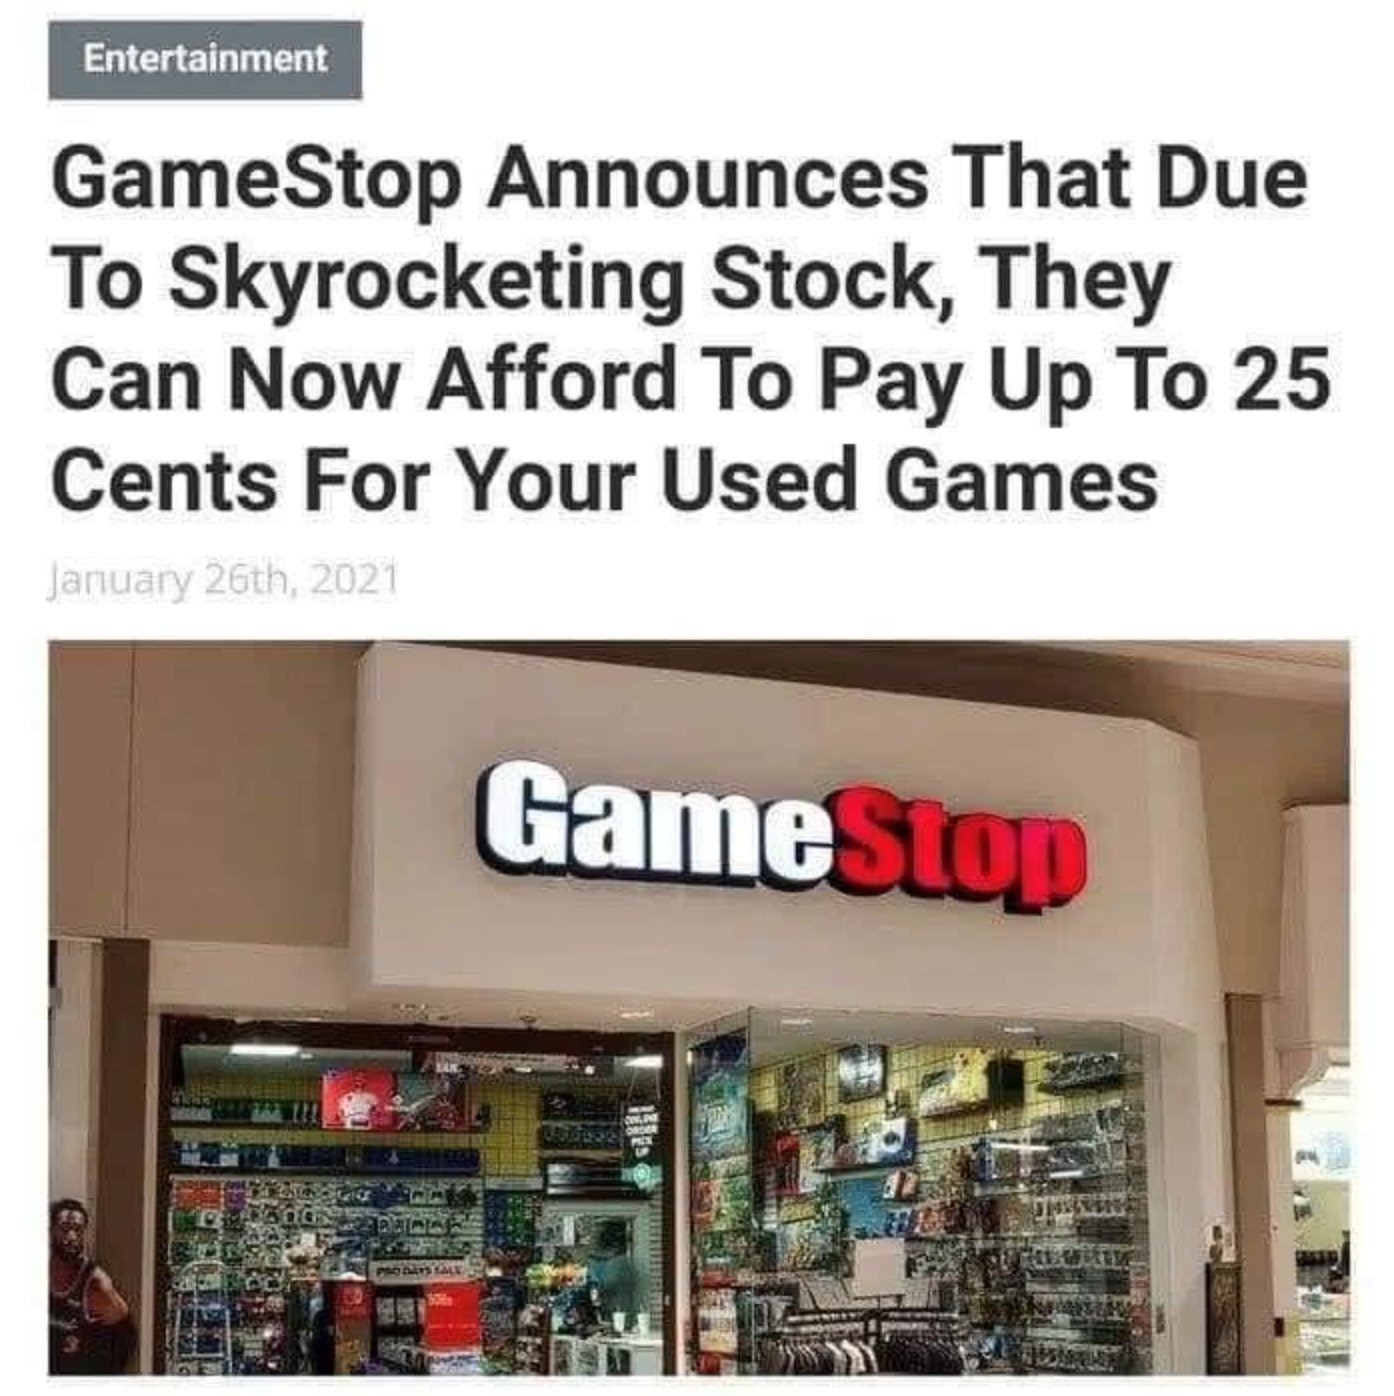 gaming memes - GameStop - Entertainment GameStop Announces That Due To Skyrocketing Stock, They Can Now Afford To Pay Up To 25 Cents For Your Used Games January 26th, 2021 Game Stop